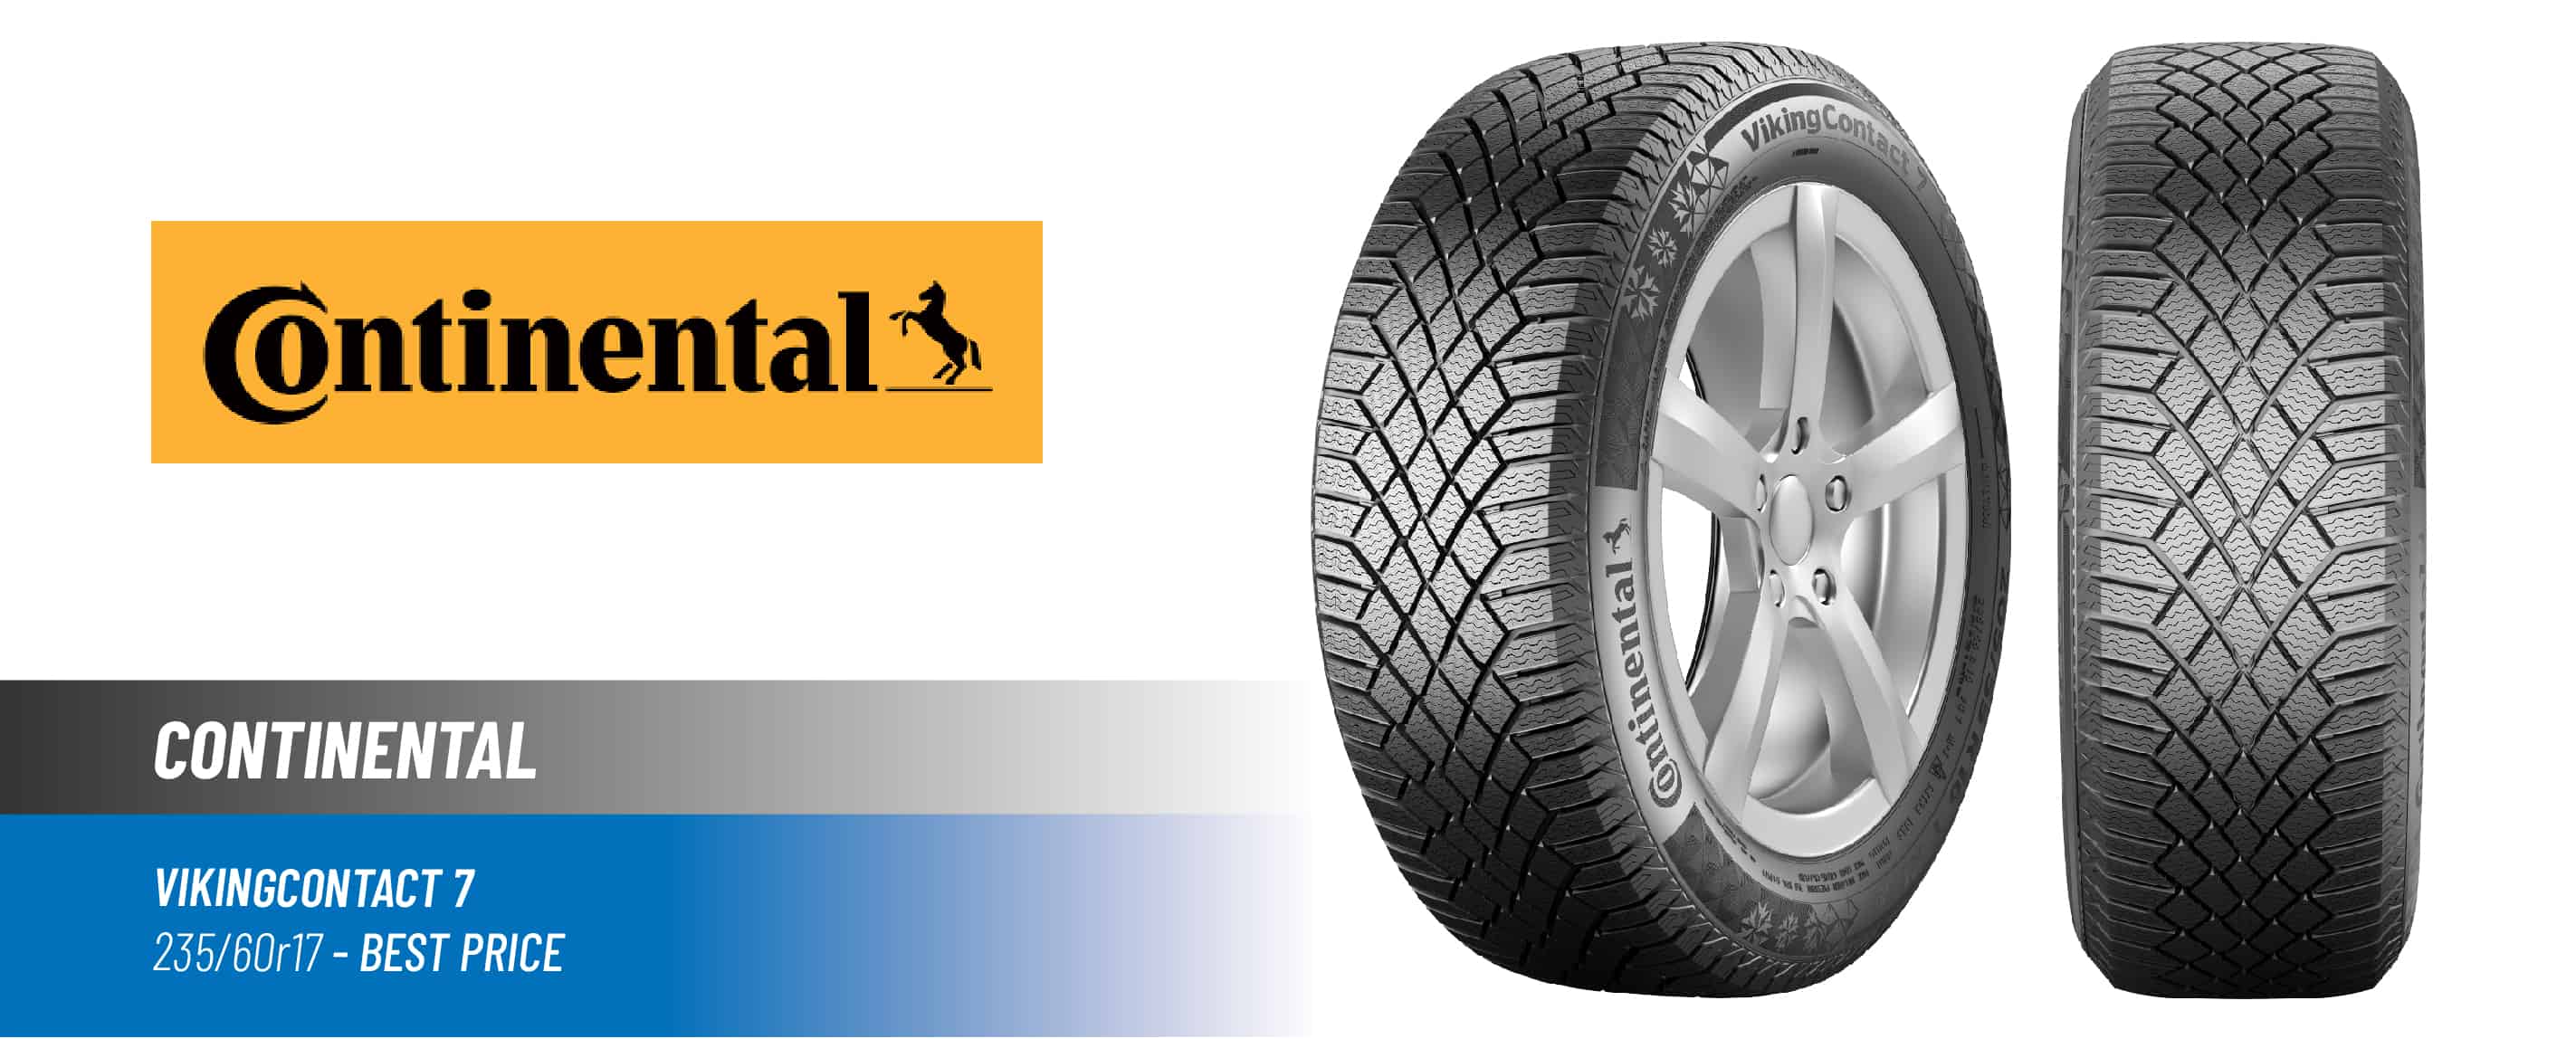 Top#5 Best Price: Continental VikingContact 7 – best 235/60r17